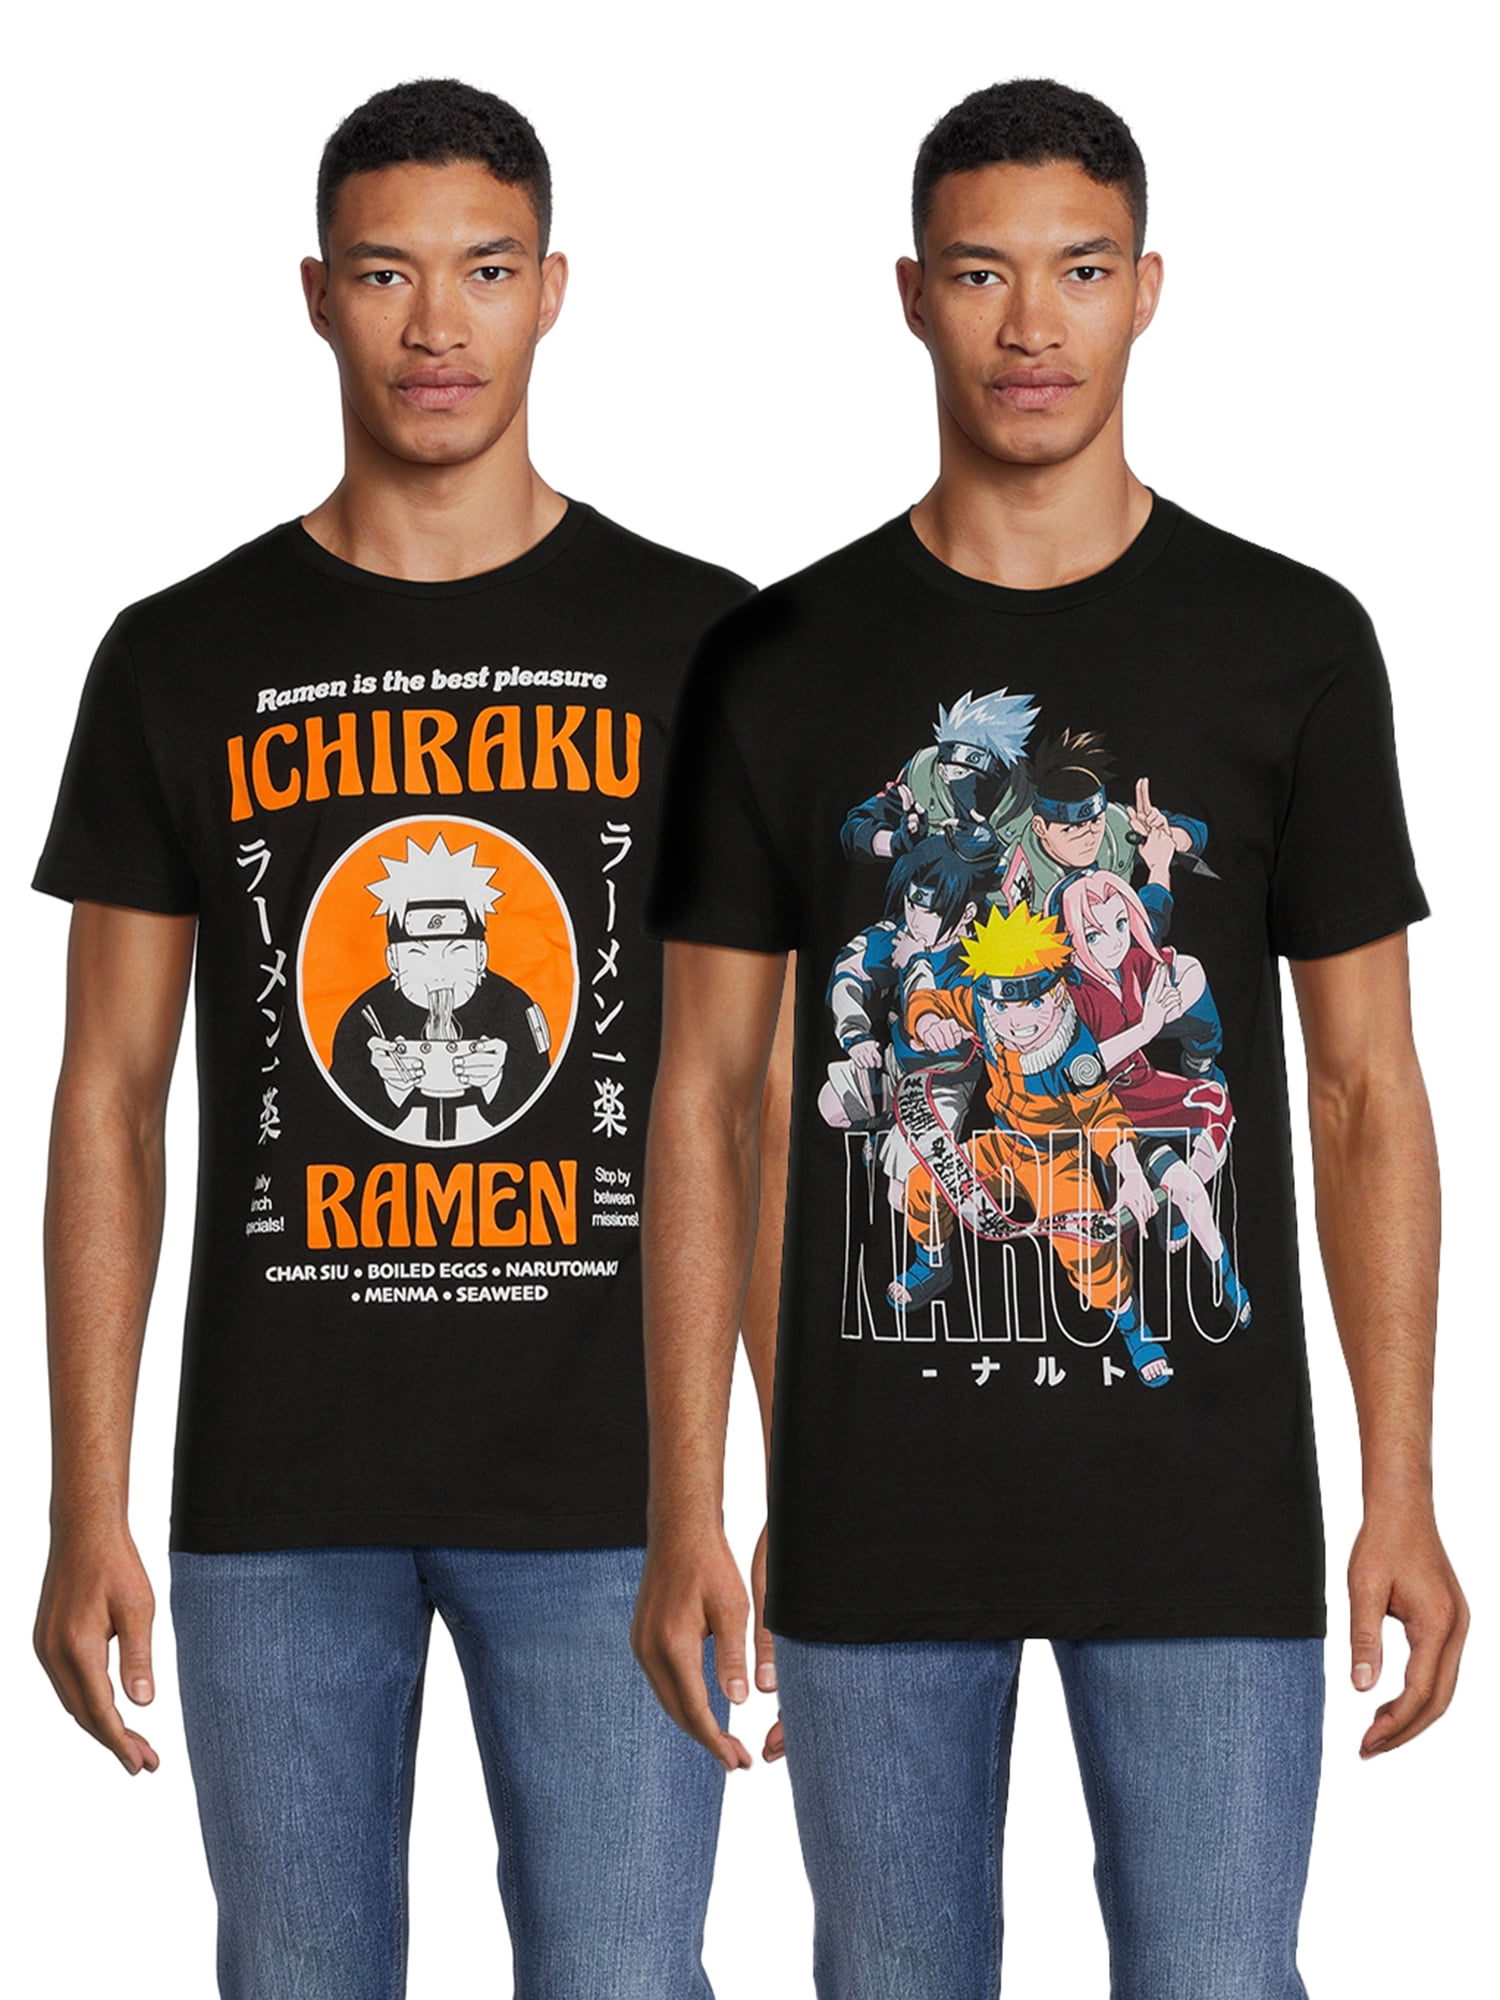 Naruto Men’s and Big Men’s Graphic T-Shirts, 2-Pack, Sizes S-3XL ...